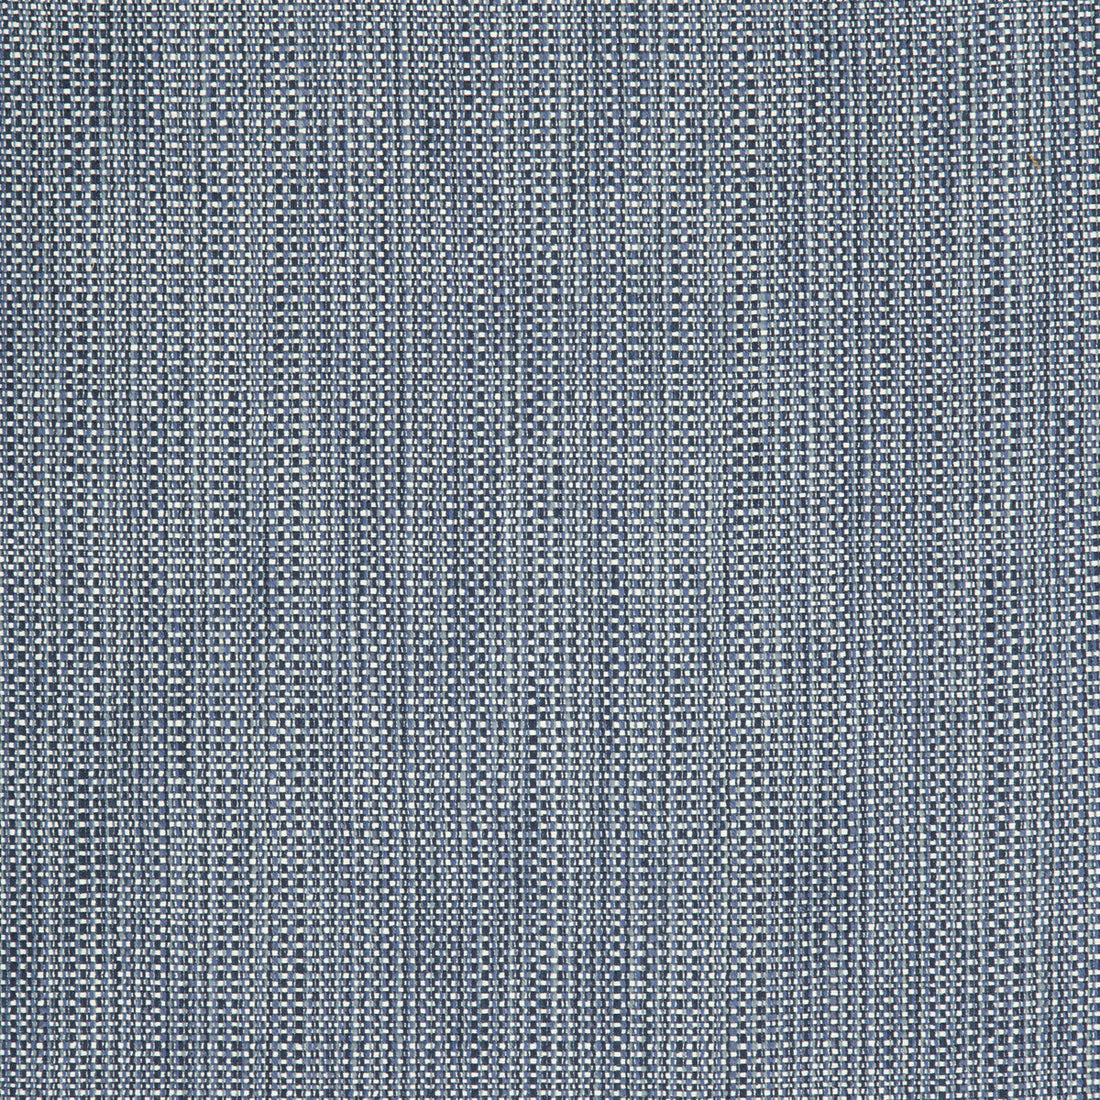 Kravet Smart fabric in 34627-50 color - pattern 34627.50.0 - by Kravet Smart in the Performance Crypton Home collection